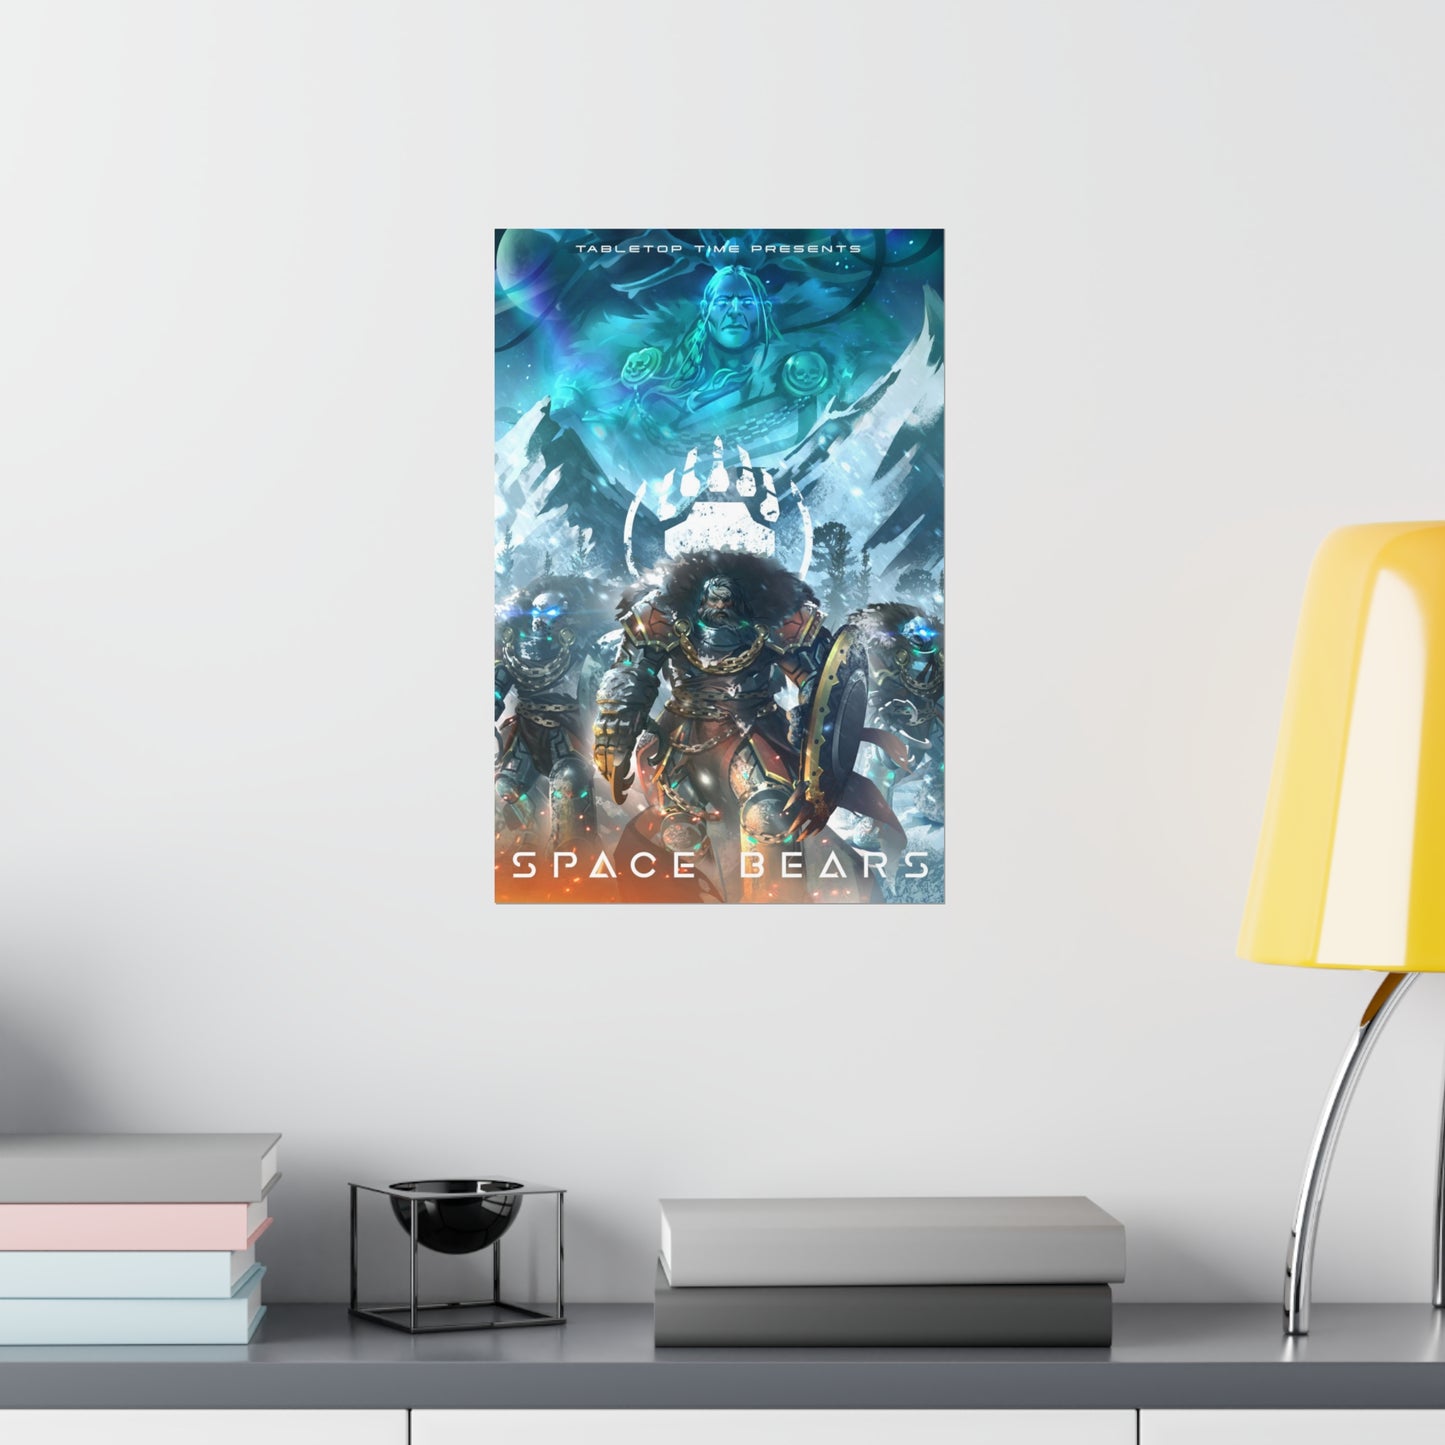 Space Bears poster